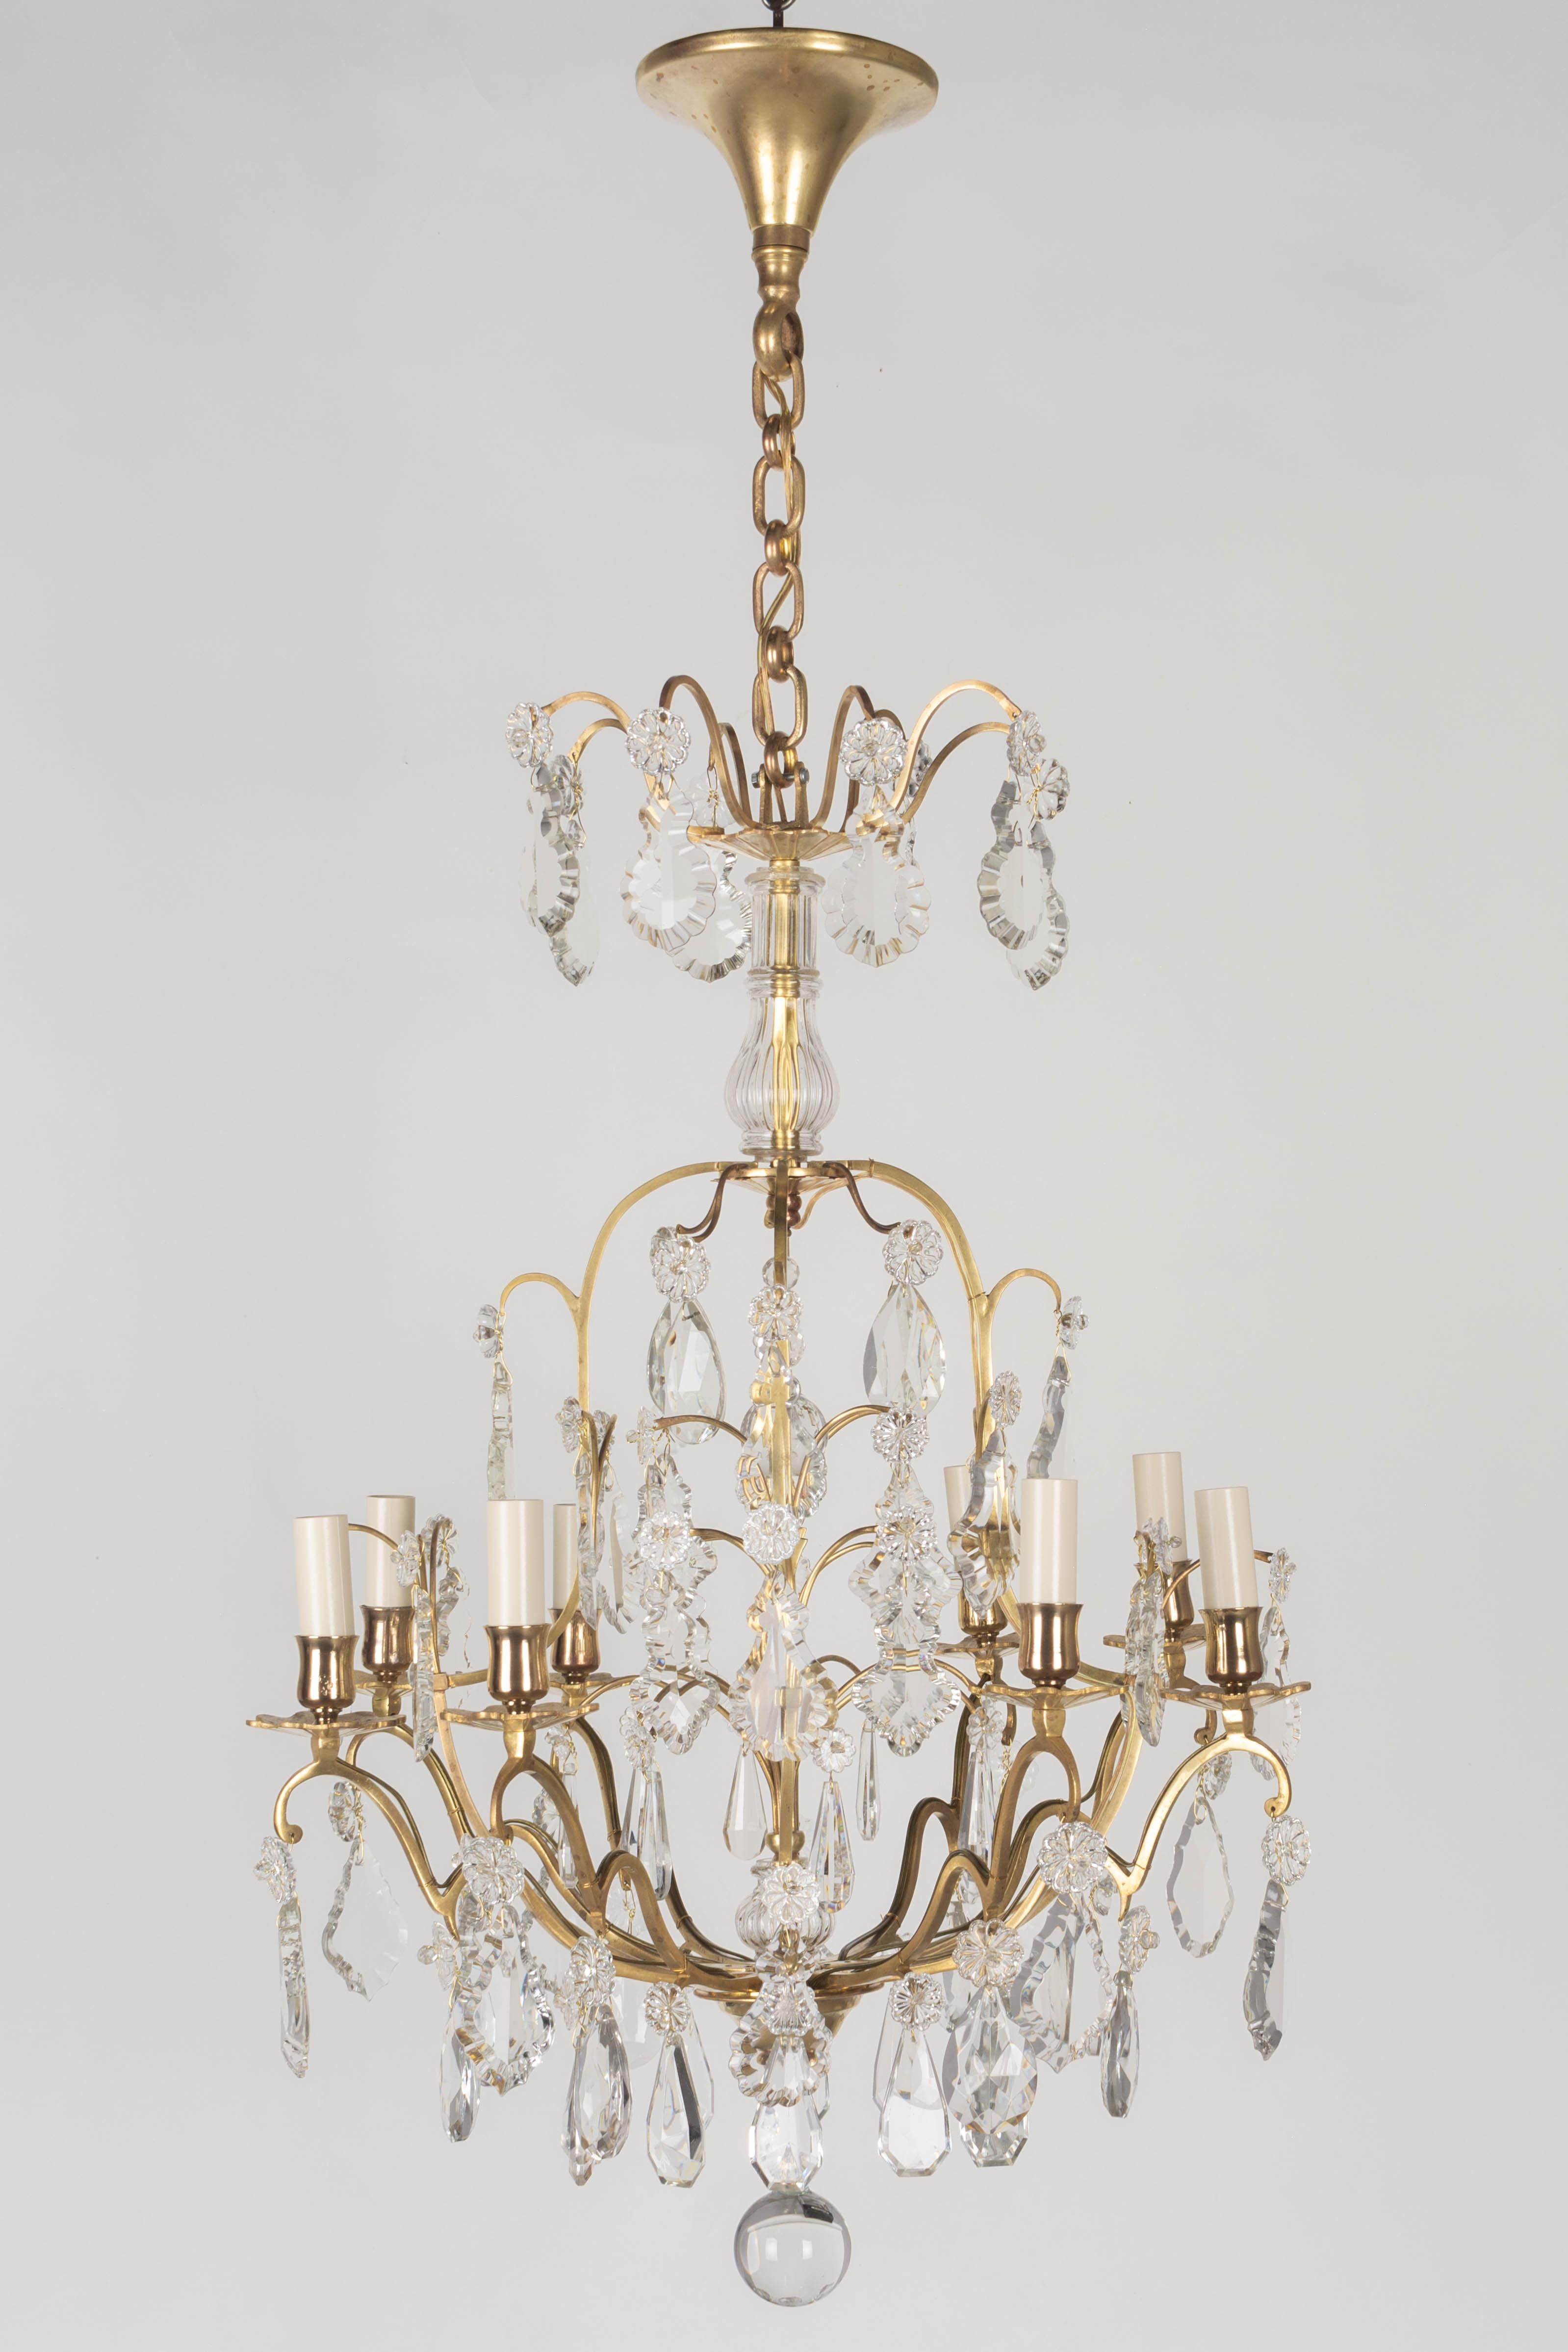 A French Louis XV style eight-light chandelier with an assortment of crystal prisms and pendalogues with rosettes, center column, and crystal spheres. Solid brass birdcage frame with cast brass bobeches has been cleaned and polished but not